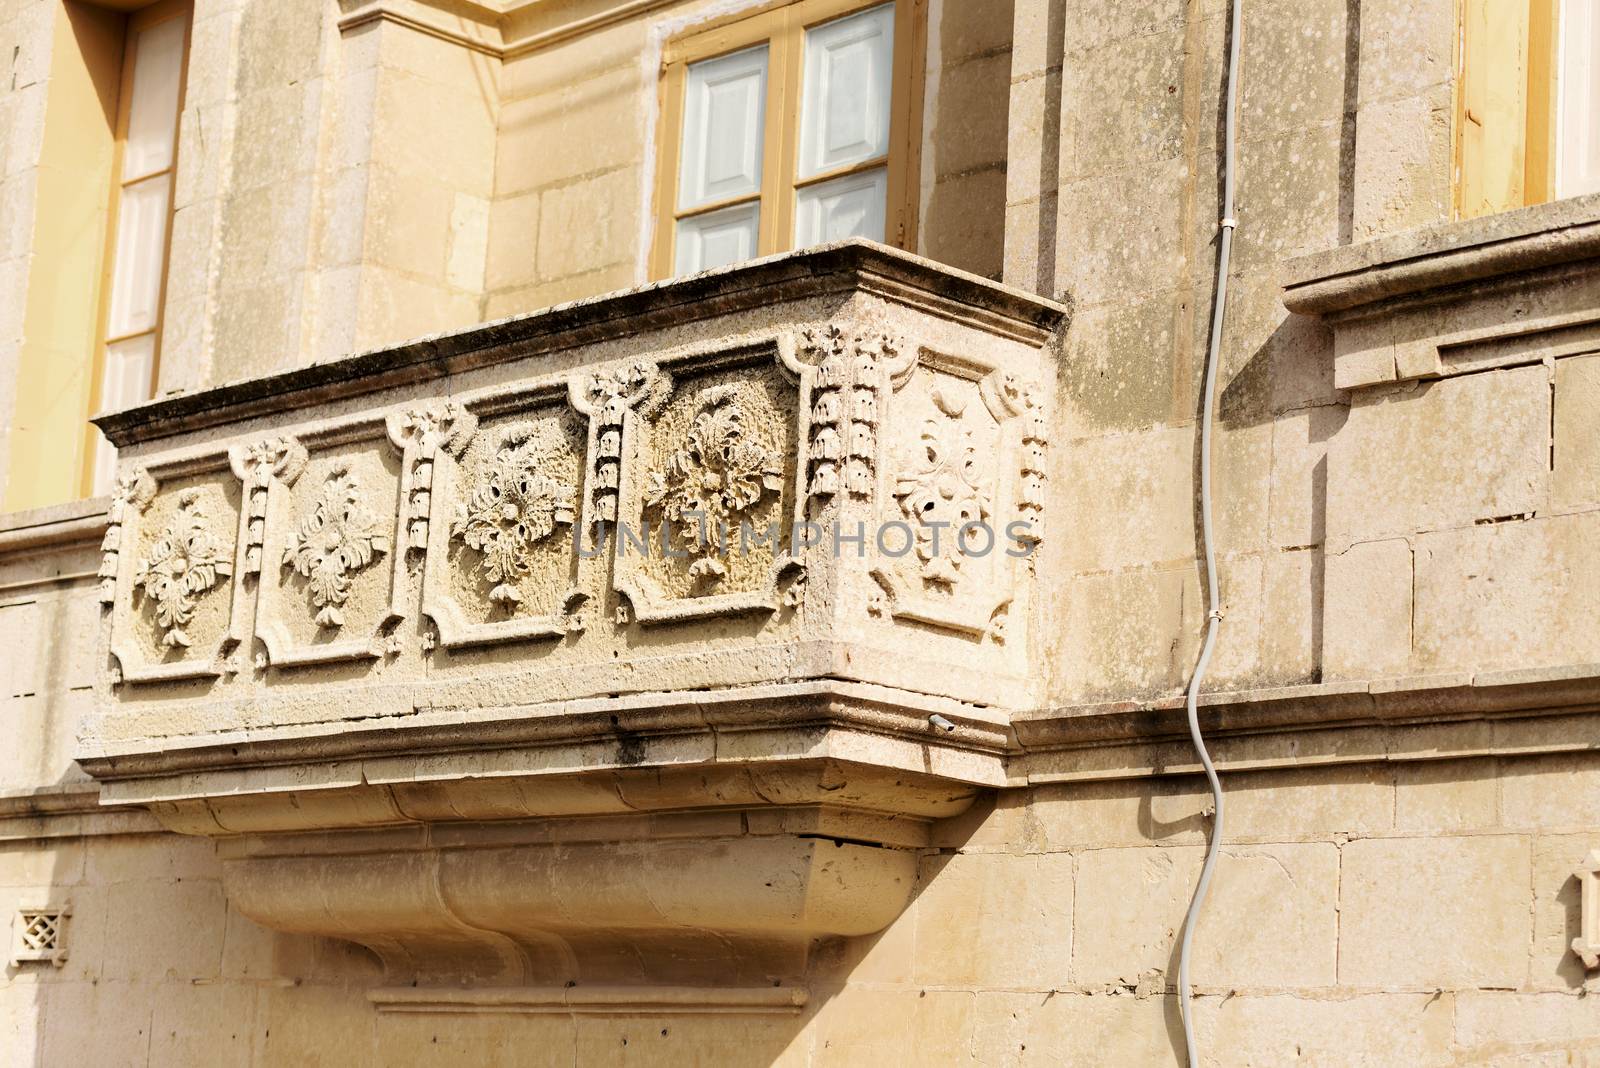 Balcony details on historical building at Malta